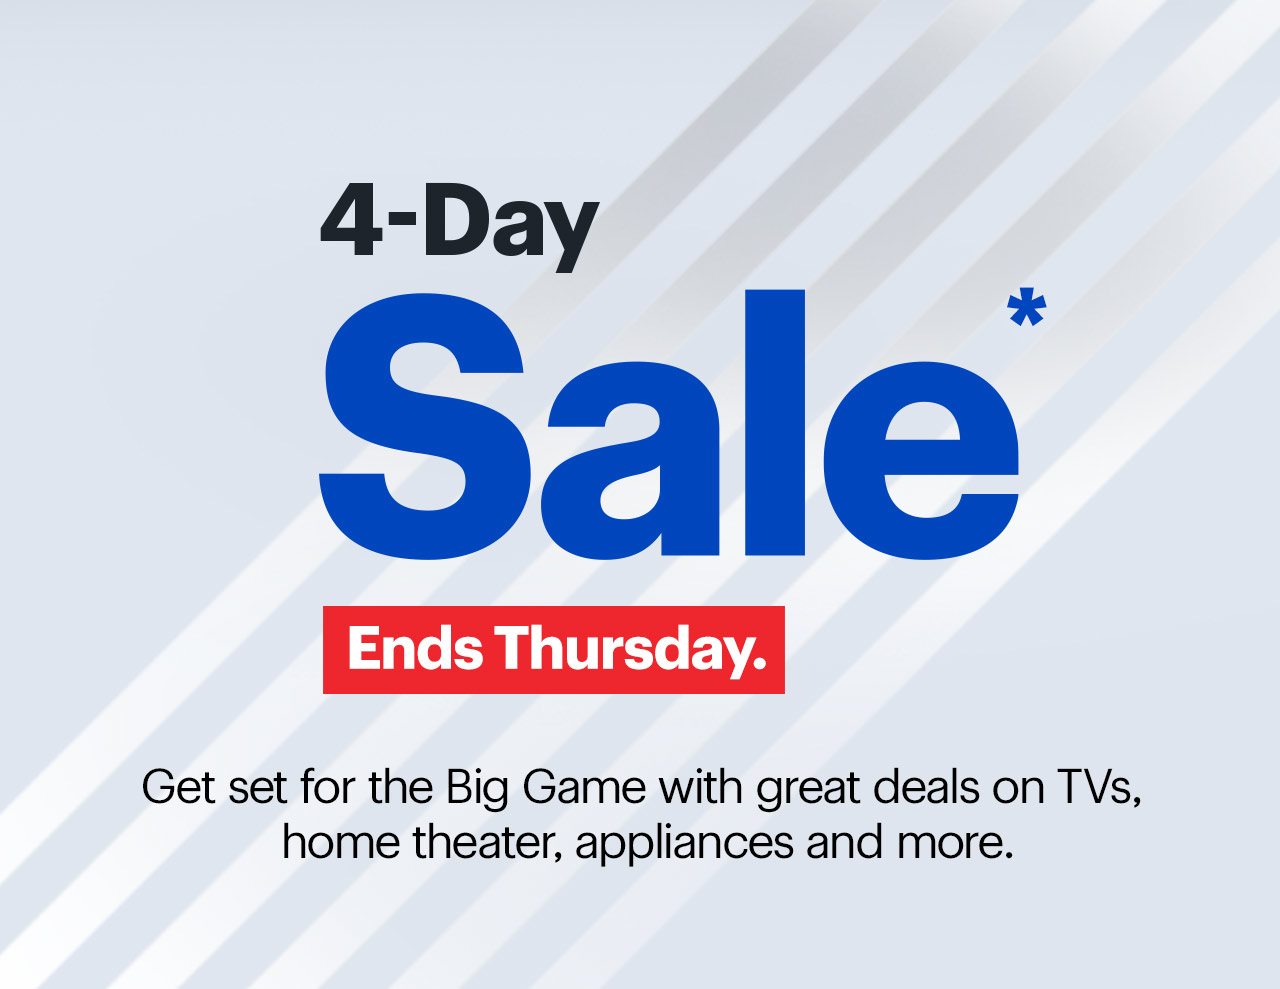 4-Day Sale ends Thursday. Get set for the Big Game with great deals on TVs, home theater, appliances and more. Reference disclaimer.